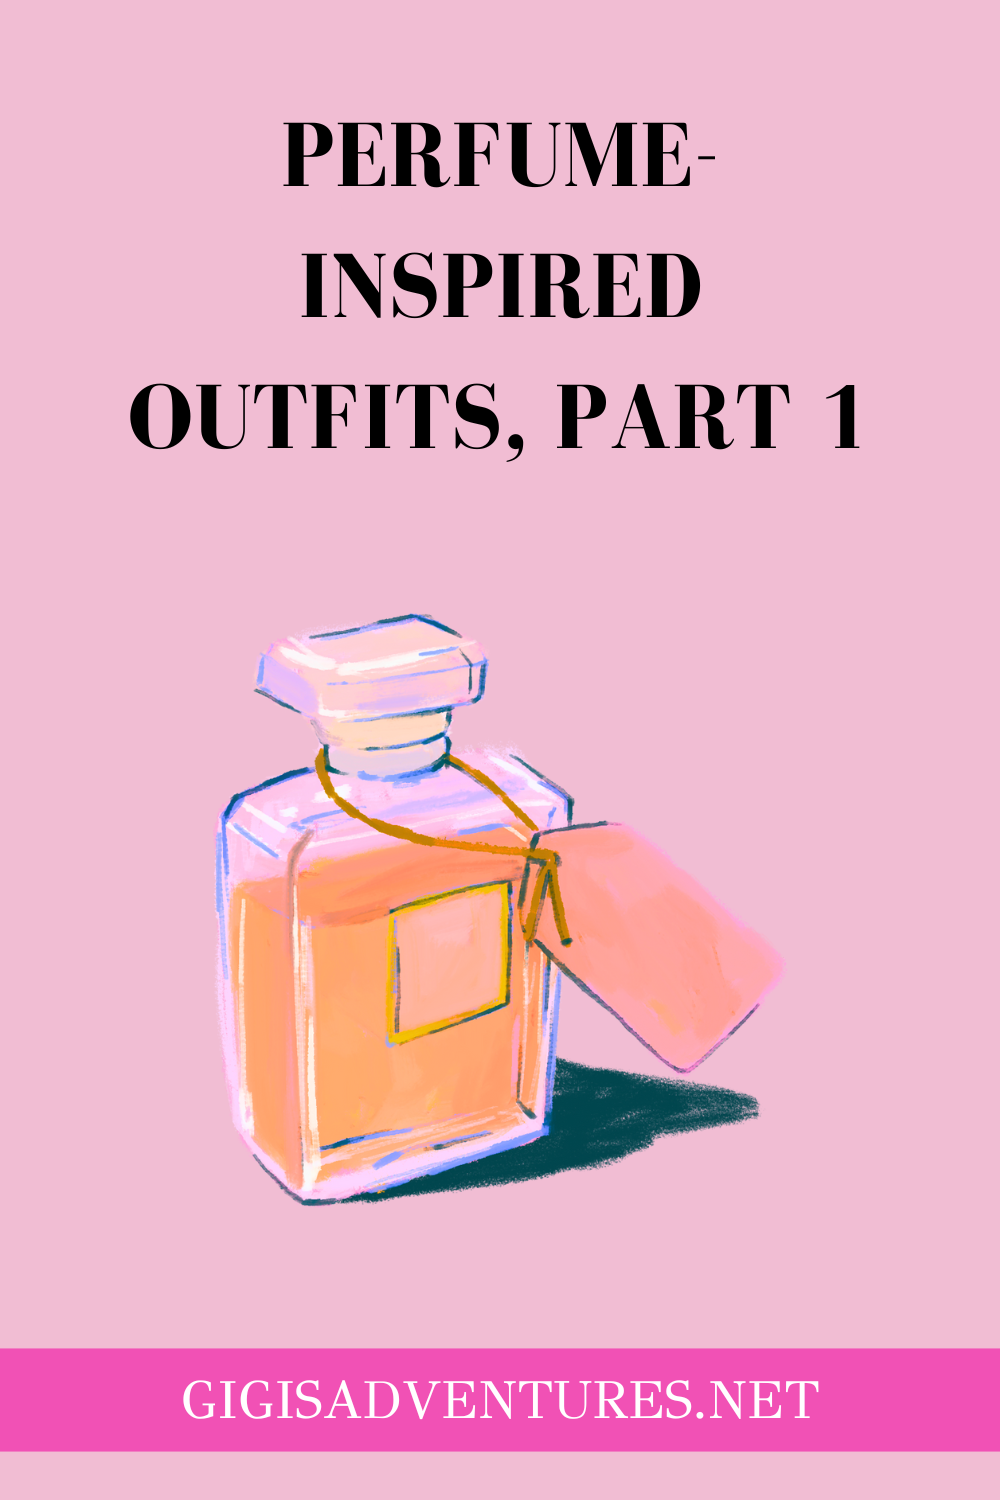 Perfume-Inspired Outfits, part 1